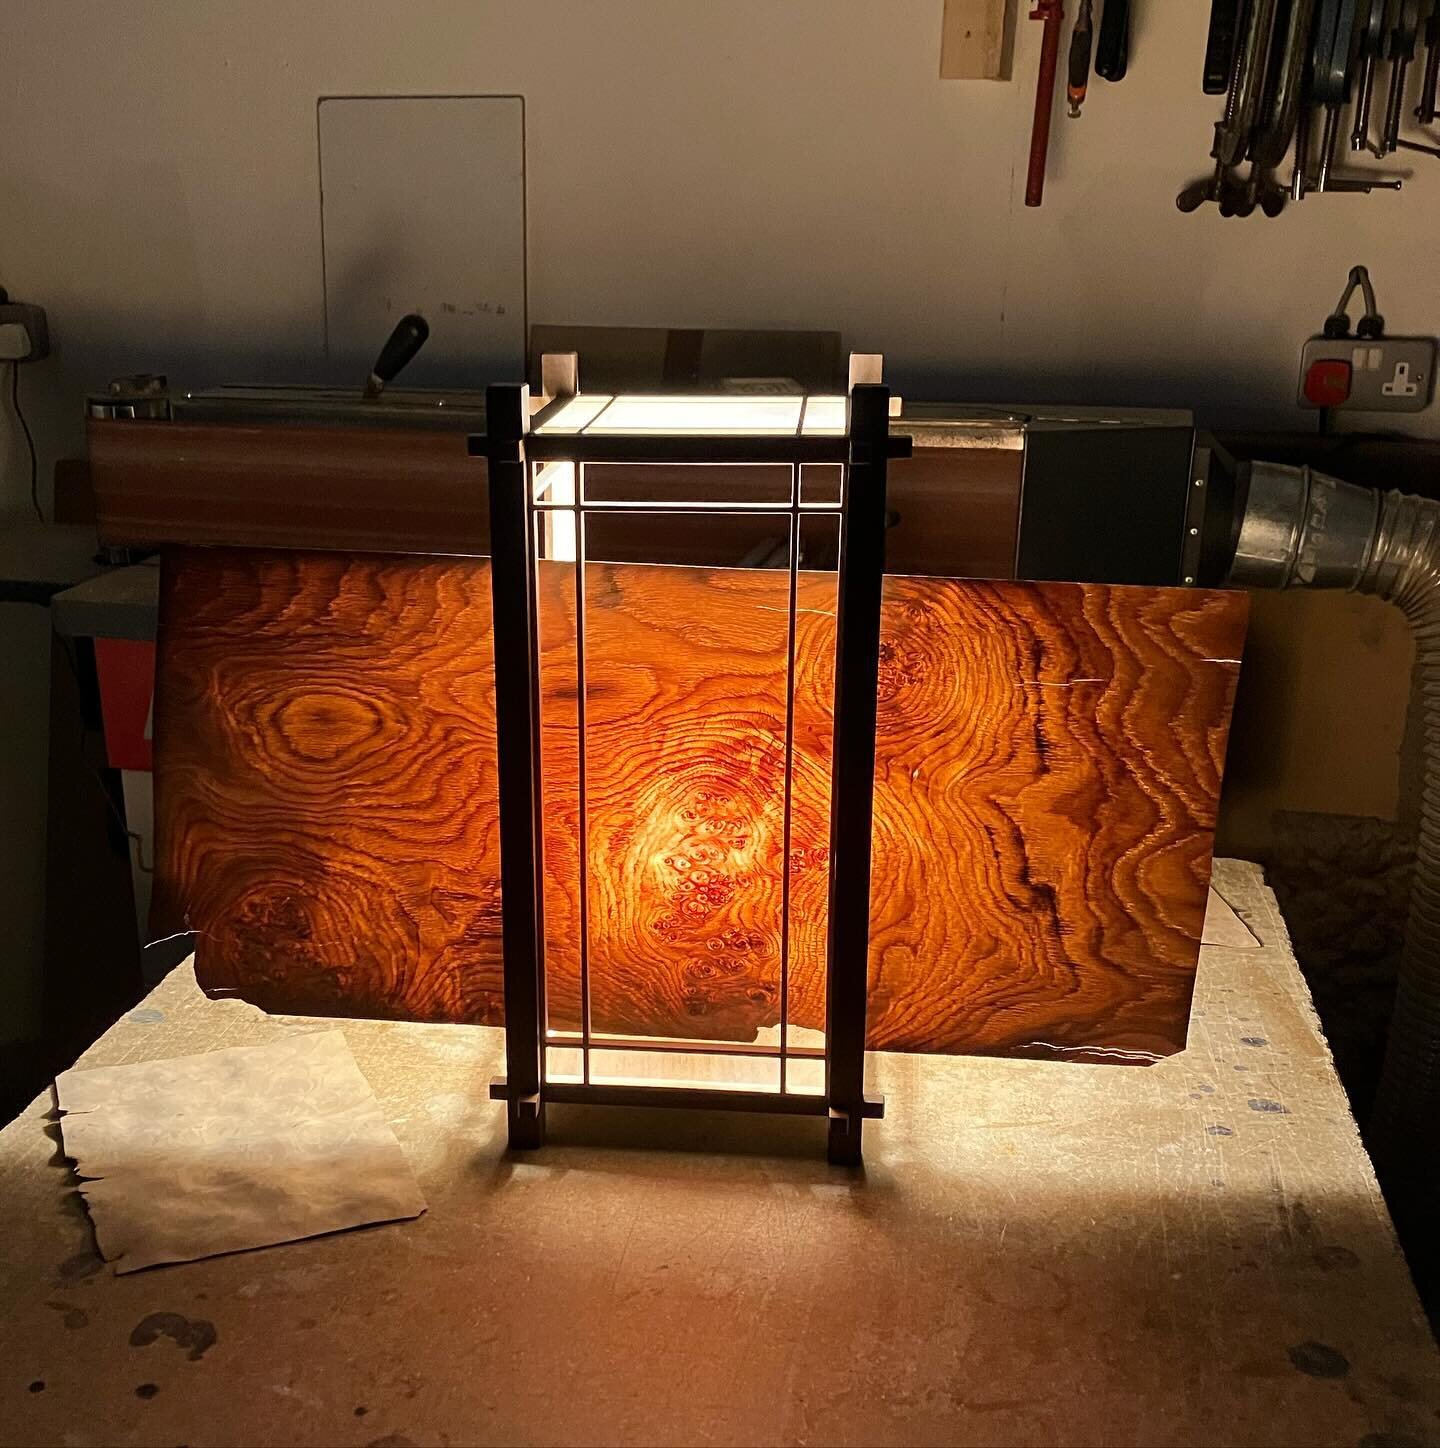 Mysterious work in progress&hellip;.
.
Okay, it&rsquo;s a shoji lamp with kumiko bars and a test leaf of burr oak in front of the bulb.  Not so mysterious, but quite a pleasing effect!
.
.
.
#handmade 
#craft 
#craftmanship 
#furniture 
#design 
#col